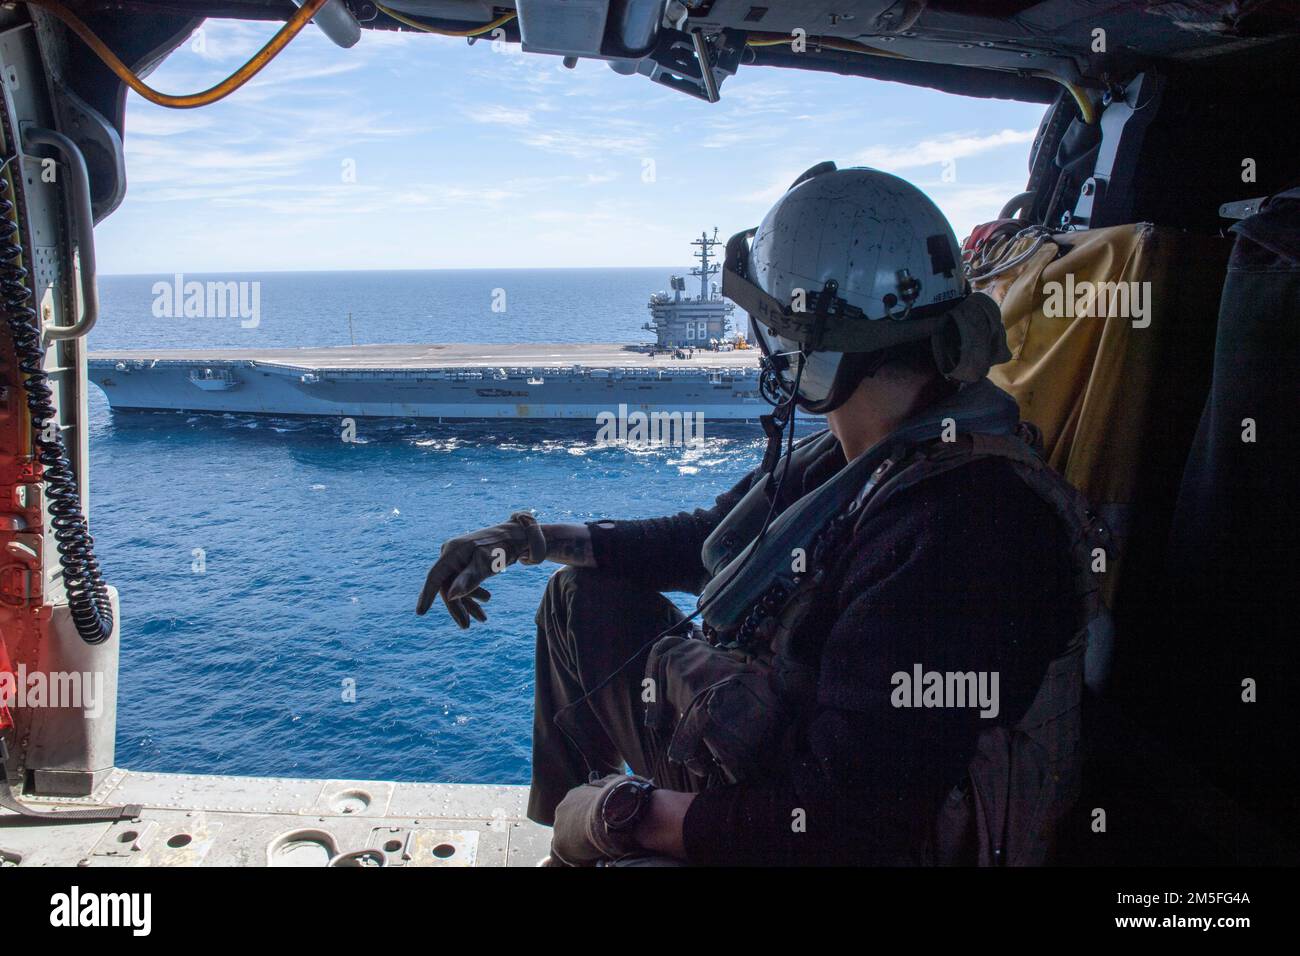 220312-N-KU796-1013 PACIFIC OCEAN (Mar. 12, 2022) A Naval Aircrewman assigned to Helicopter Sea Combat Squadron (HSC) 6, rides in an MH-60S Sea Hawk helicopter. Nimitz is underway conducting routine operations. Stock Photo